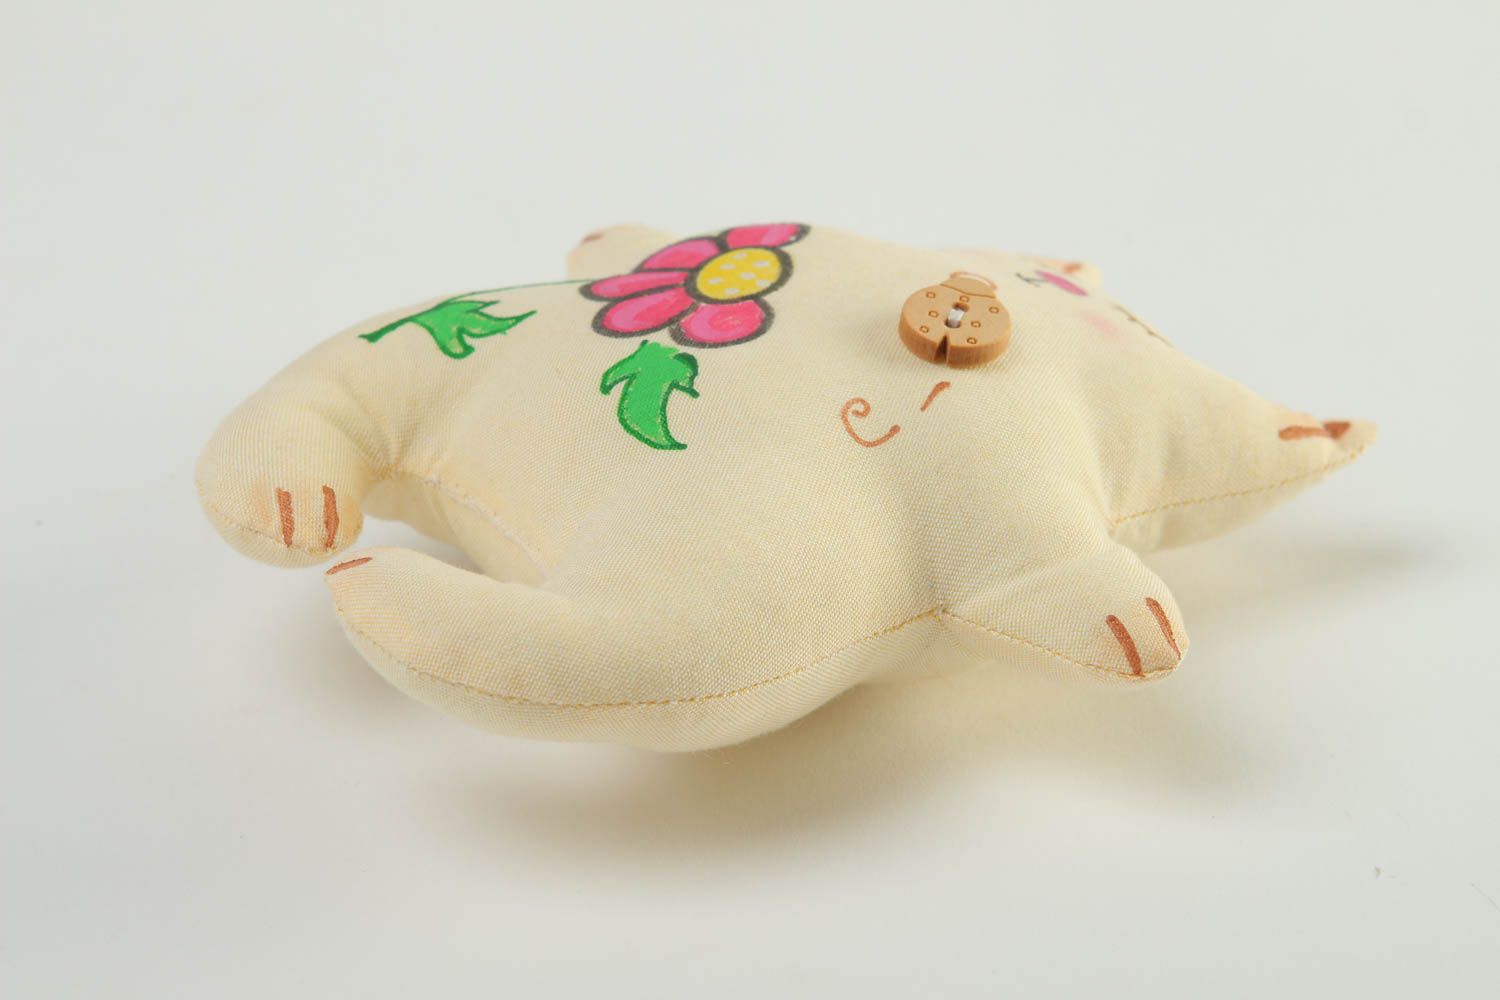 Unusual handmade fabric soft toy stuffed toy for kids living room designs  photo 4